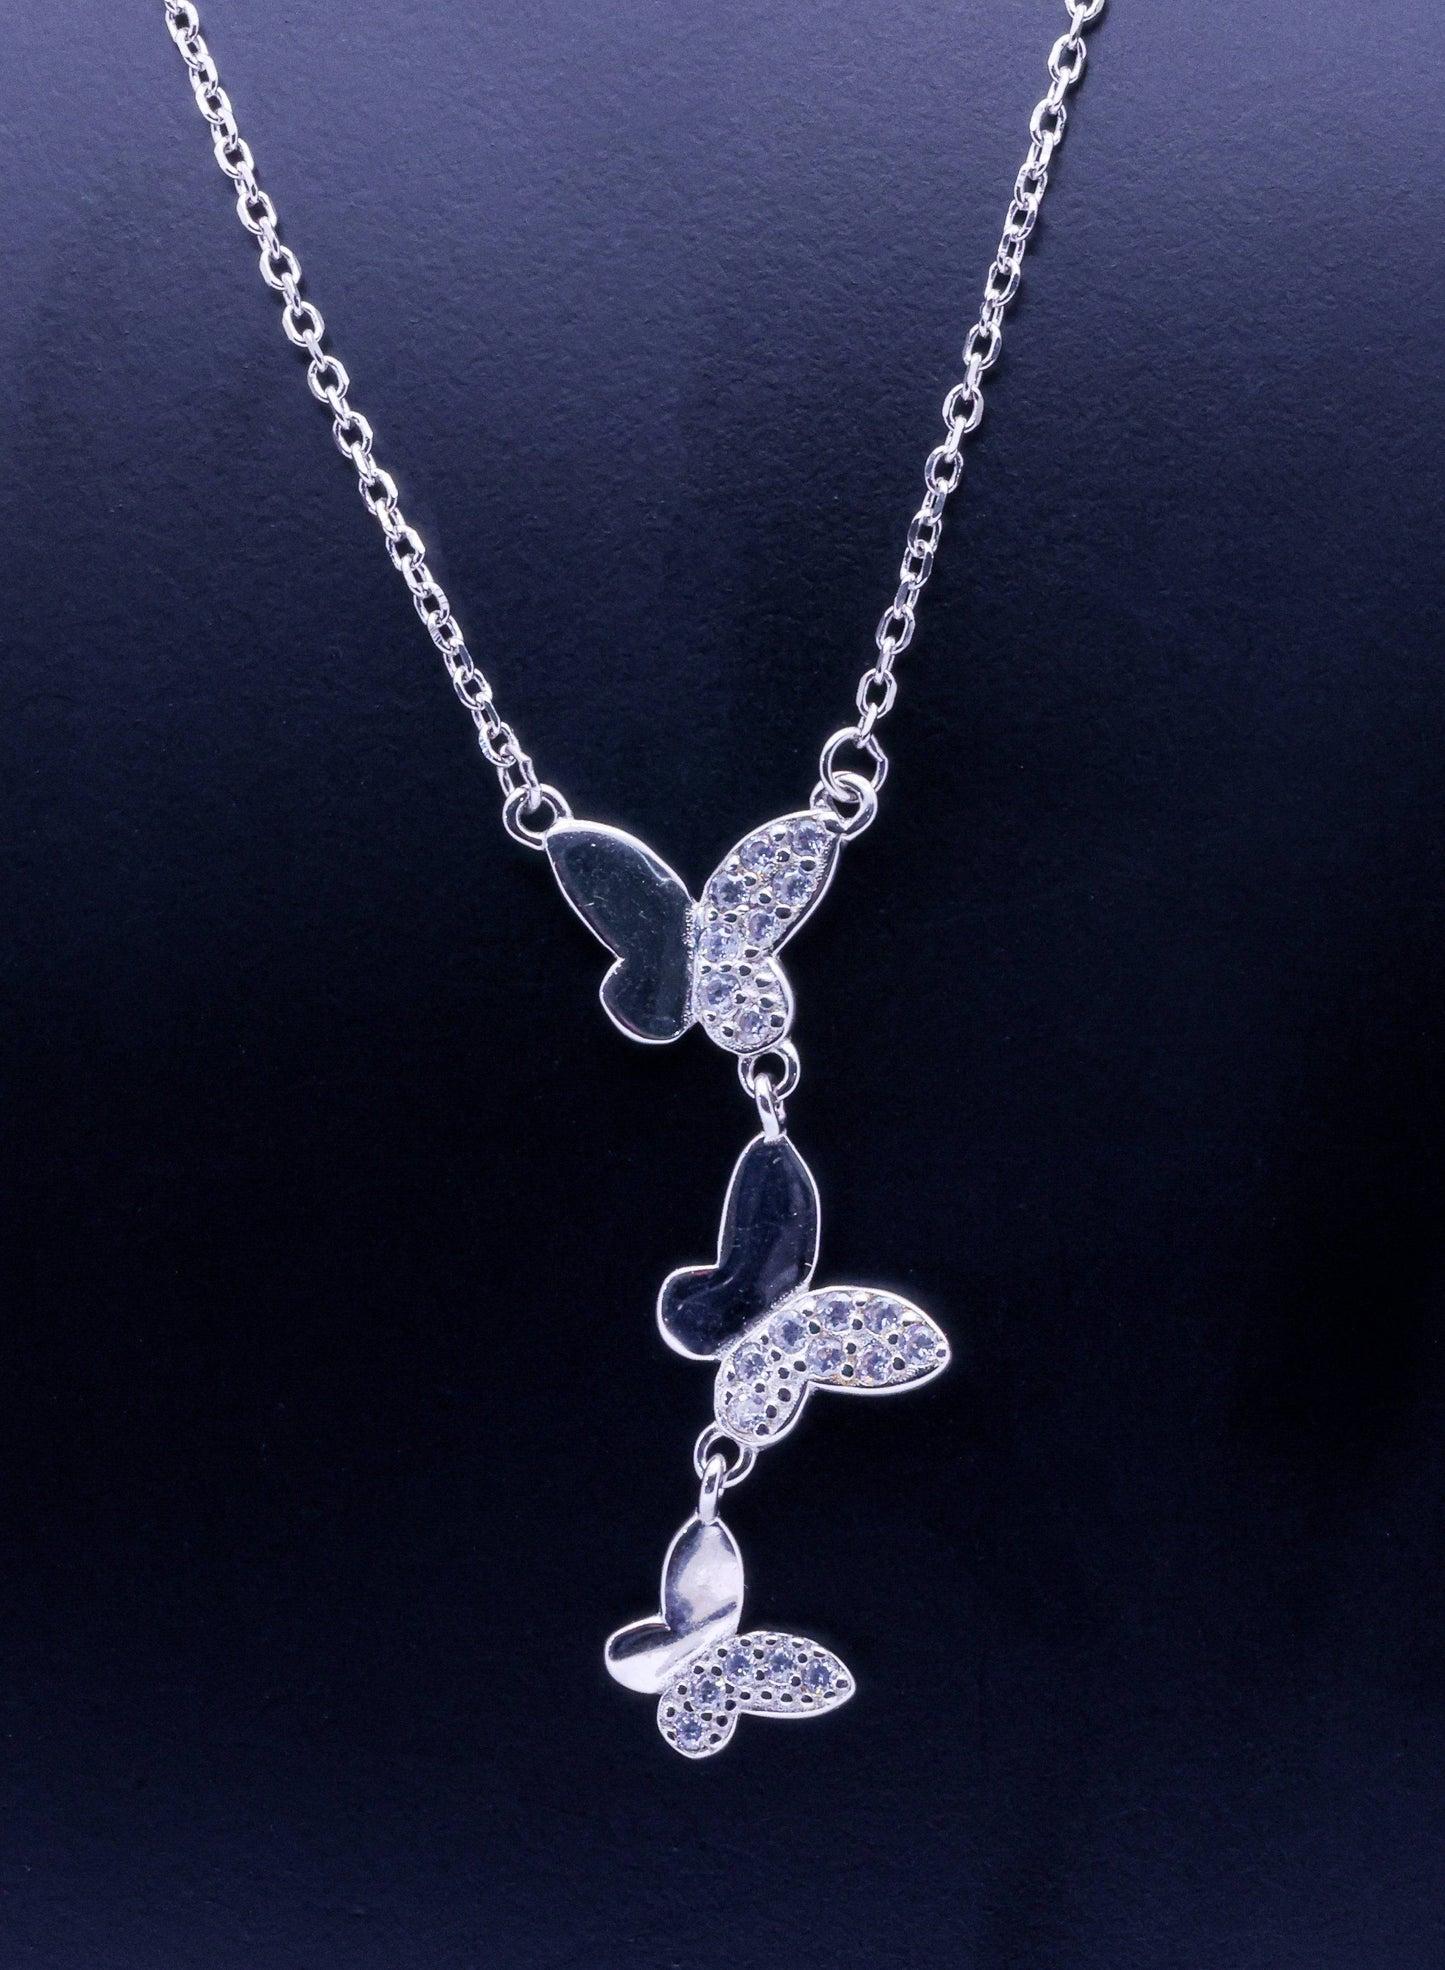 Enchanting Sterling Silver Butterfly Necklace - 3.5G, 35CM